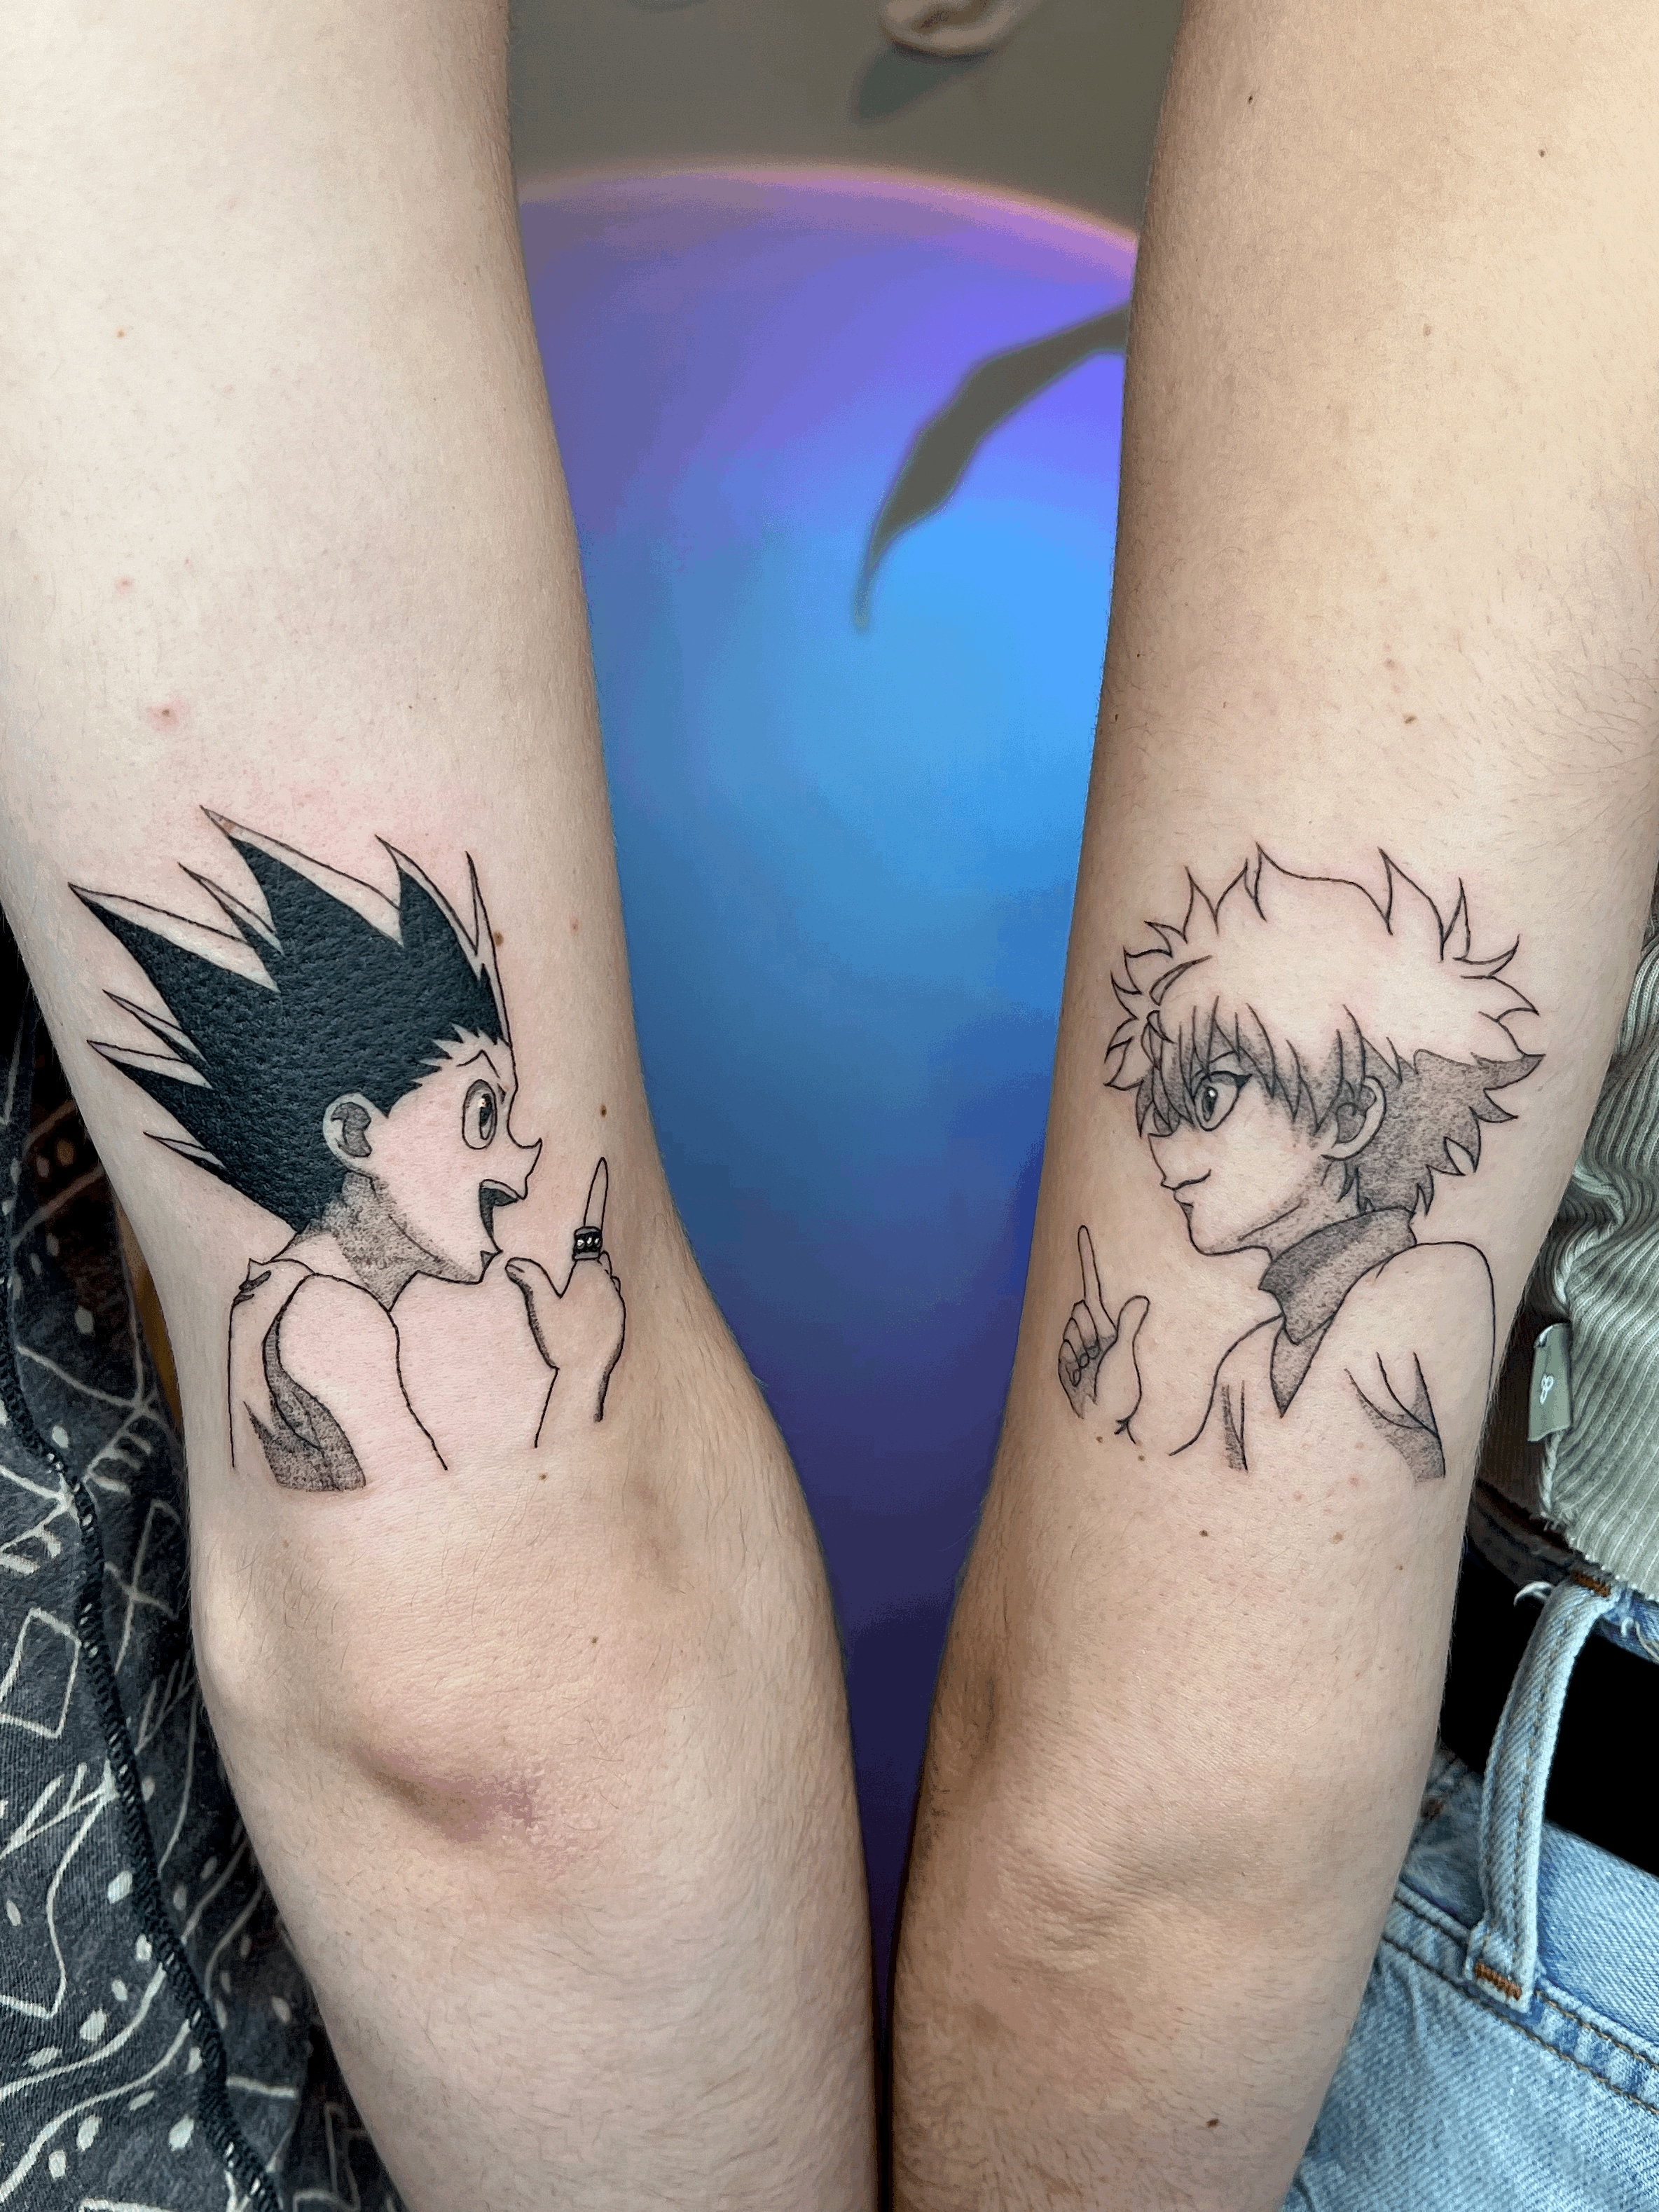 Usual load of tattoos for ya Killua is healed with a few touch ups here  and there while the Gon portrait is fresh Love the way that  Instagram